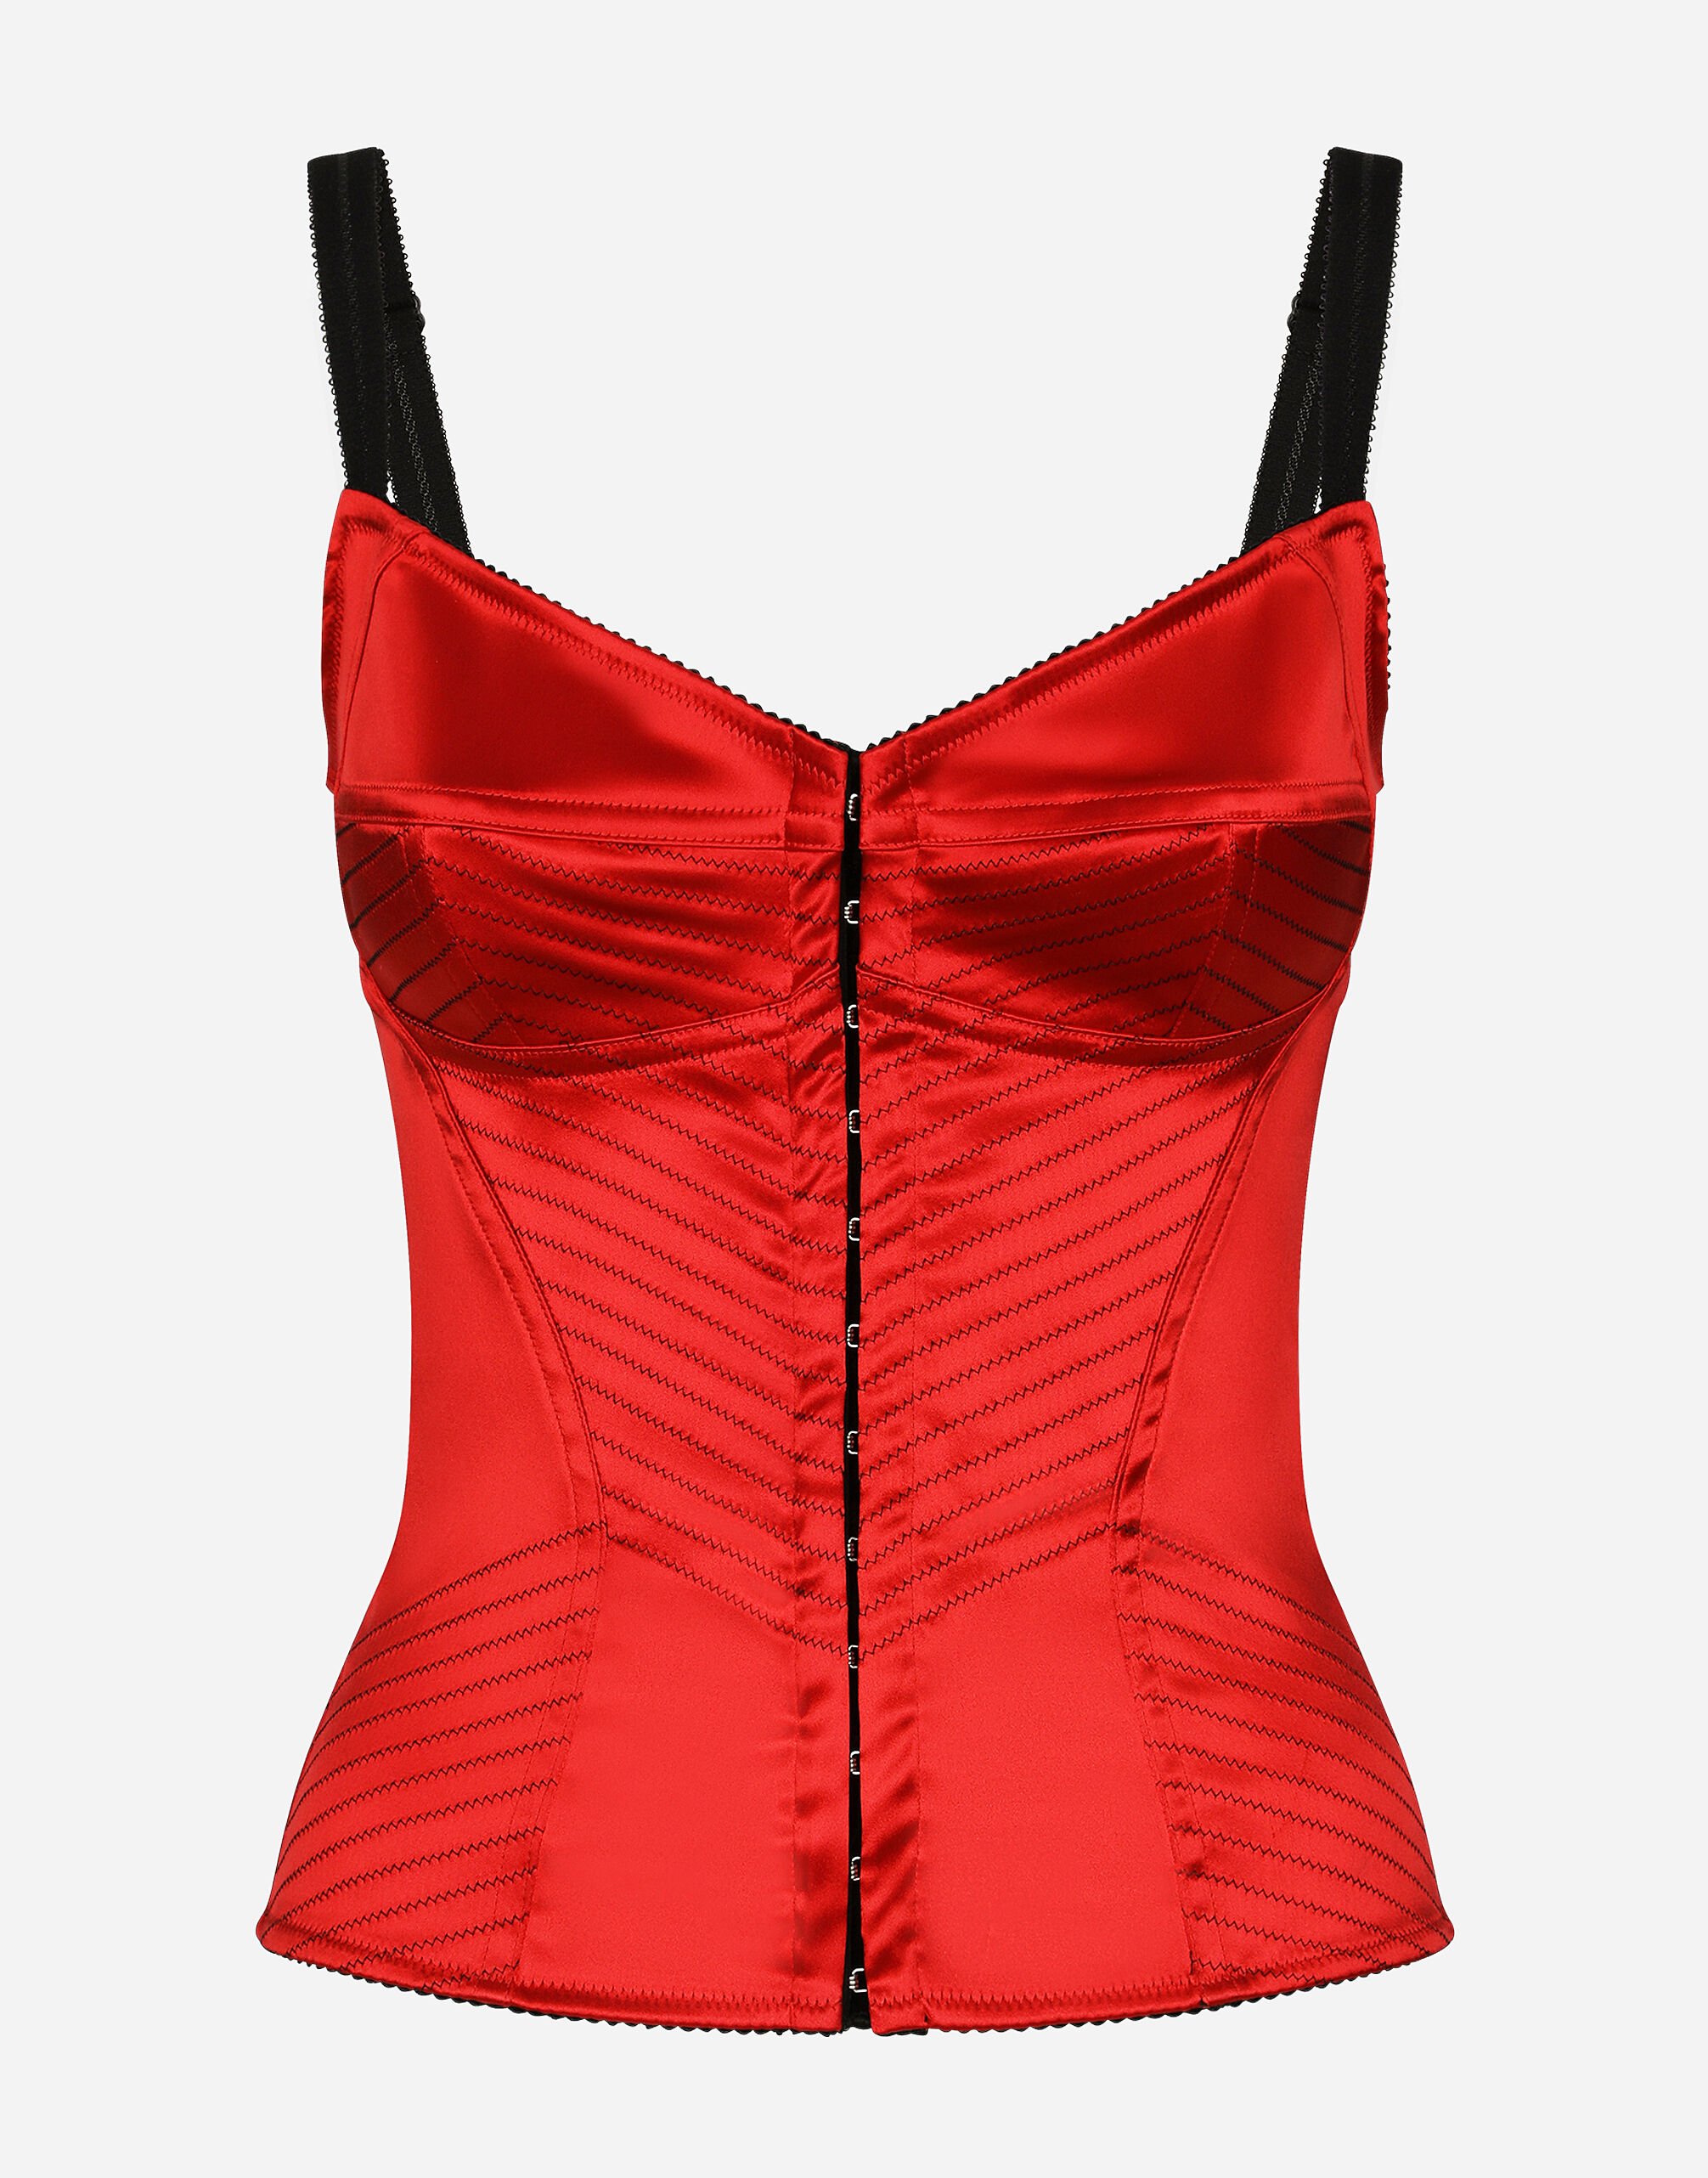 Dolce & Gabbana Satin corset with top-stitching and hook-and-eye fastenings Multicolor FTAIADG8EZ8